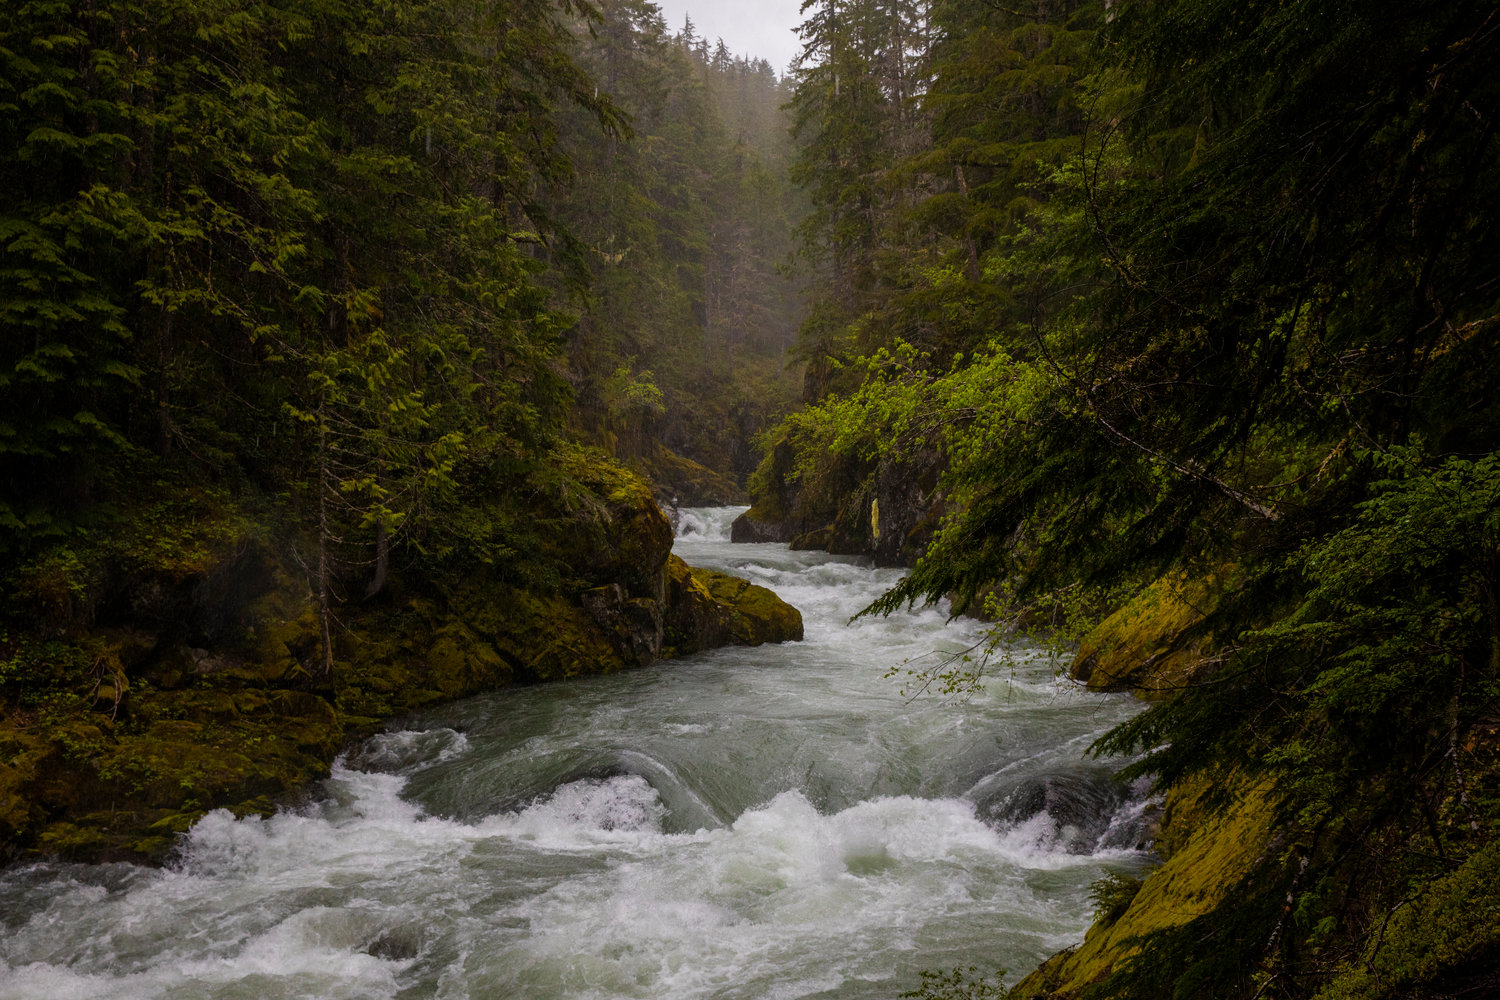 The Ohanapecosh River rushes through trees on Sunday in Mount Rainier National Park.